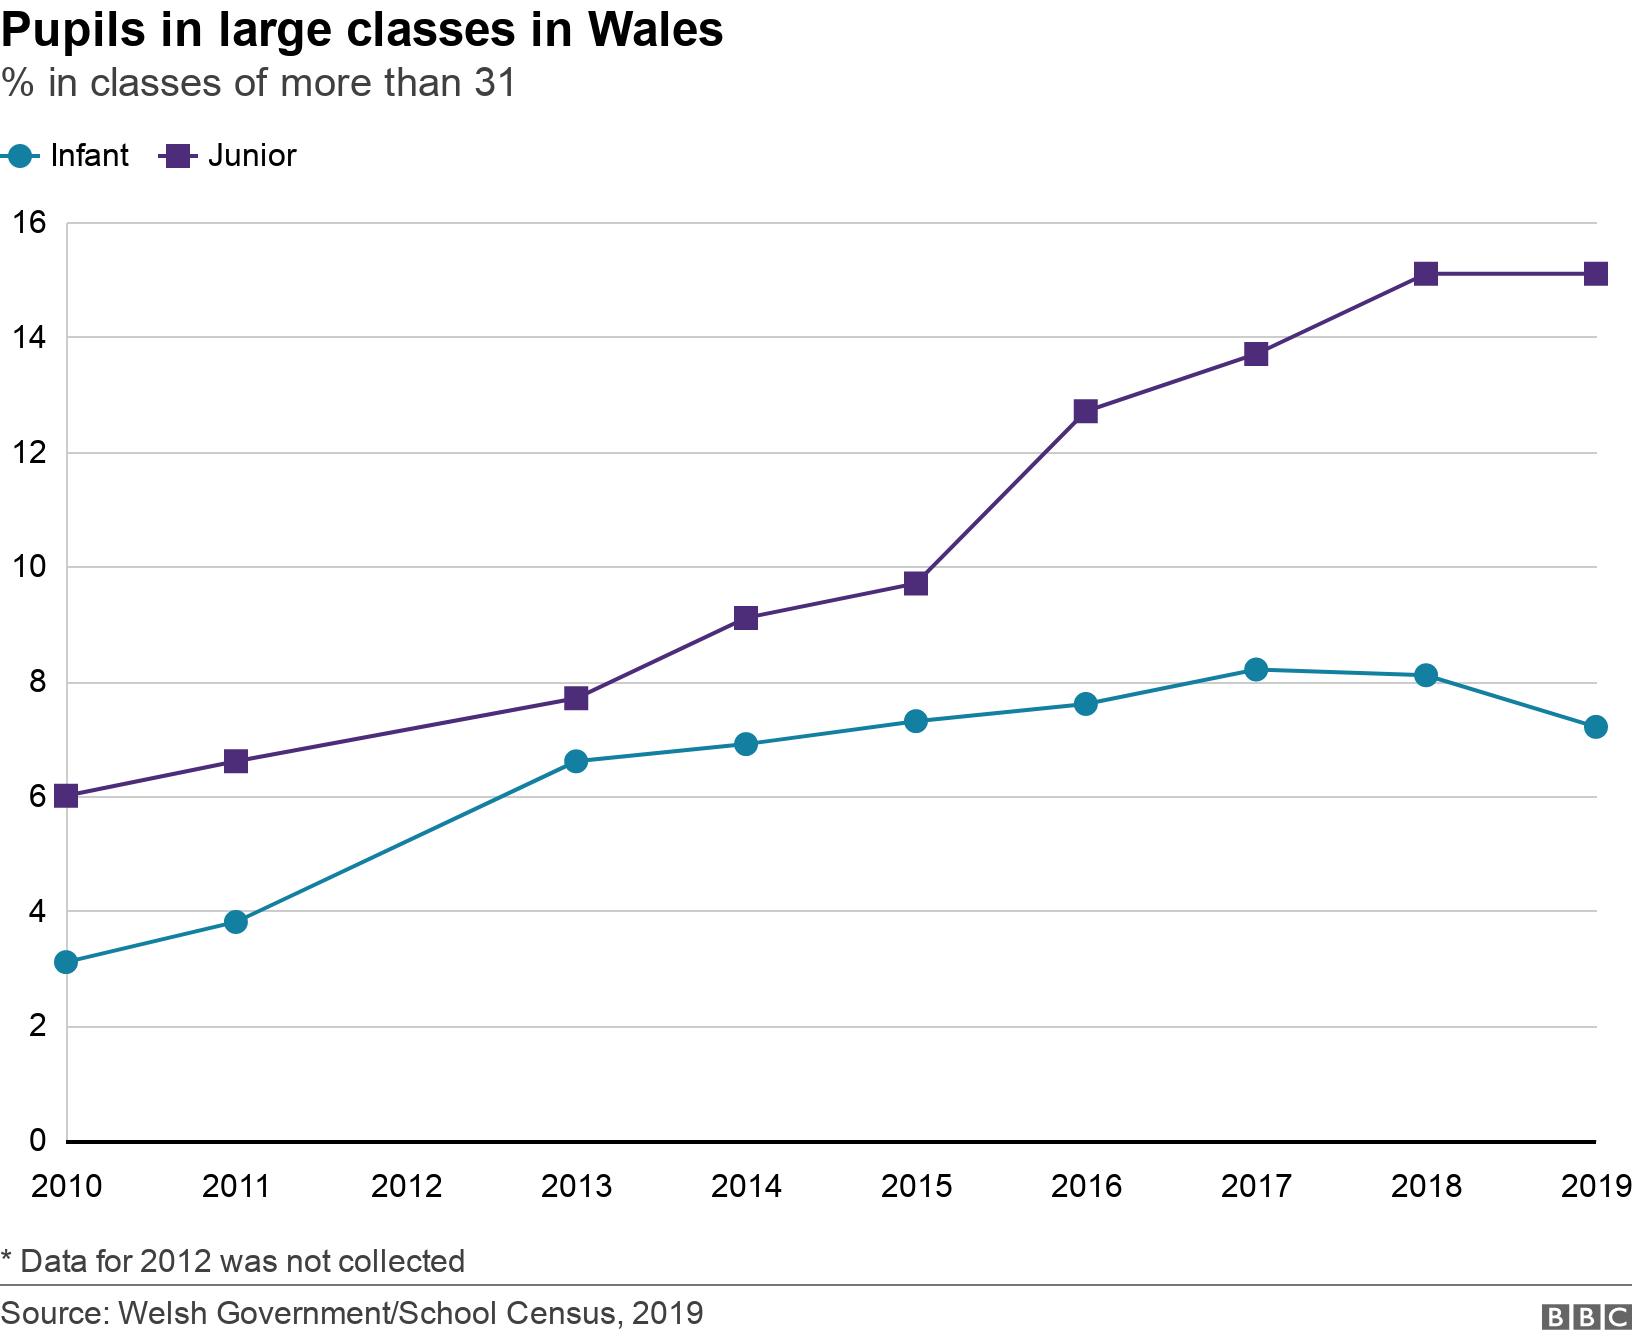 Pupils in large classes in Wales. % in classes of more than 31. * Data for 2012 was not collected.